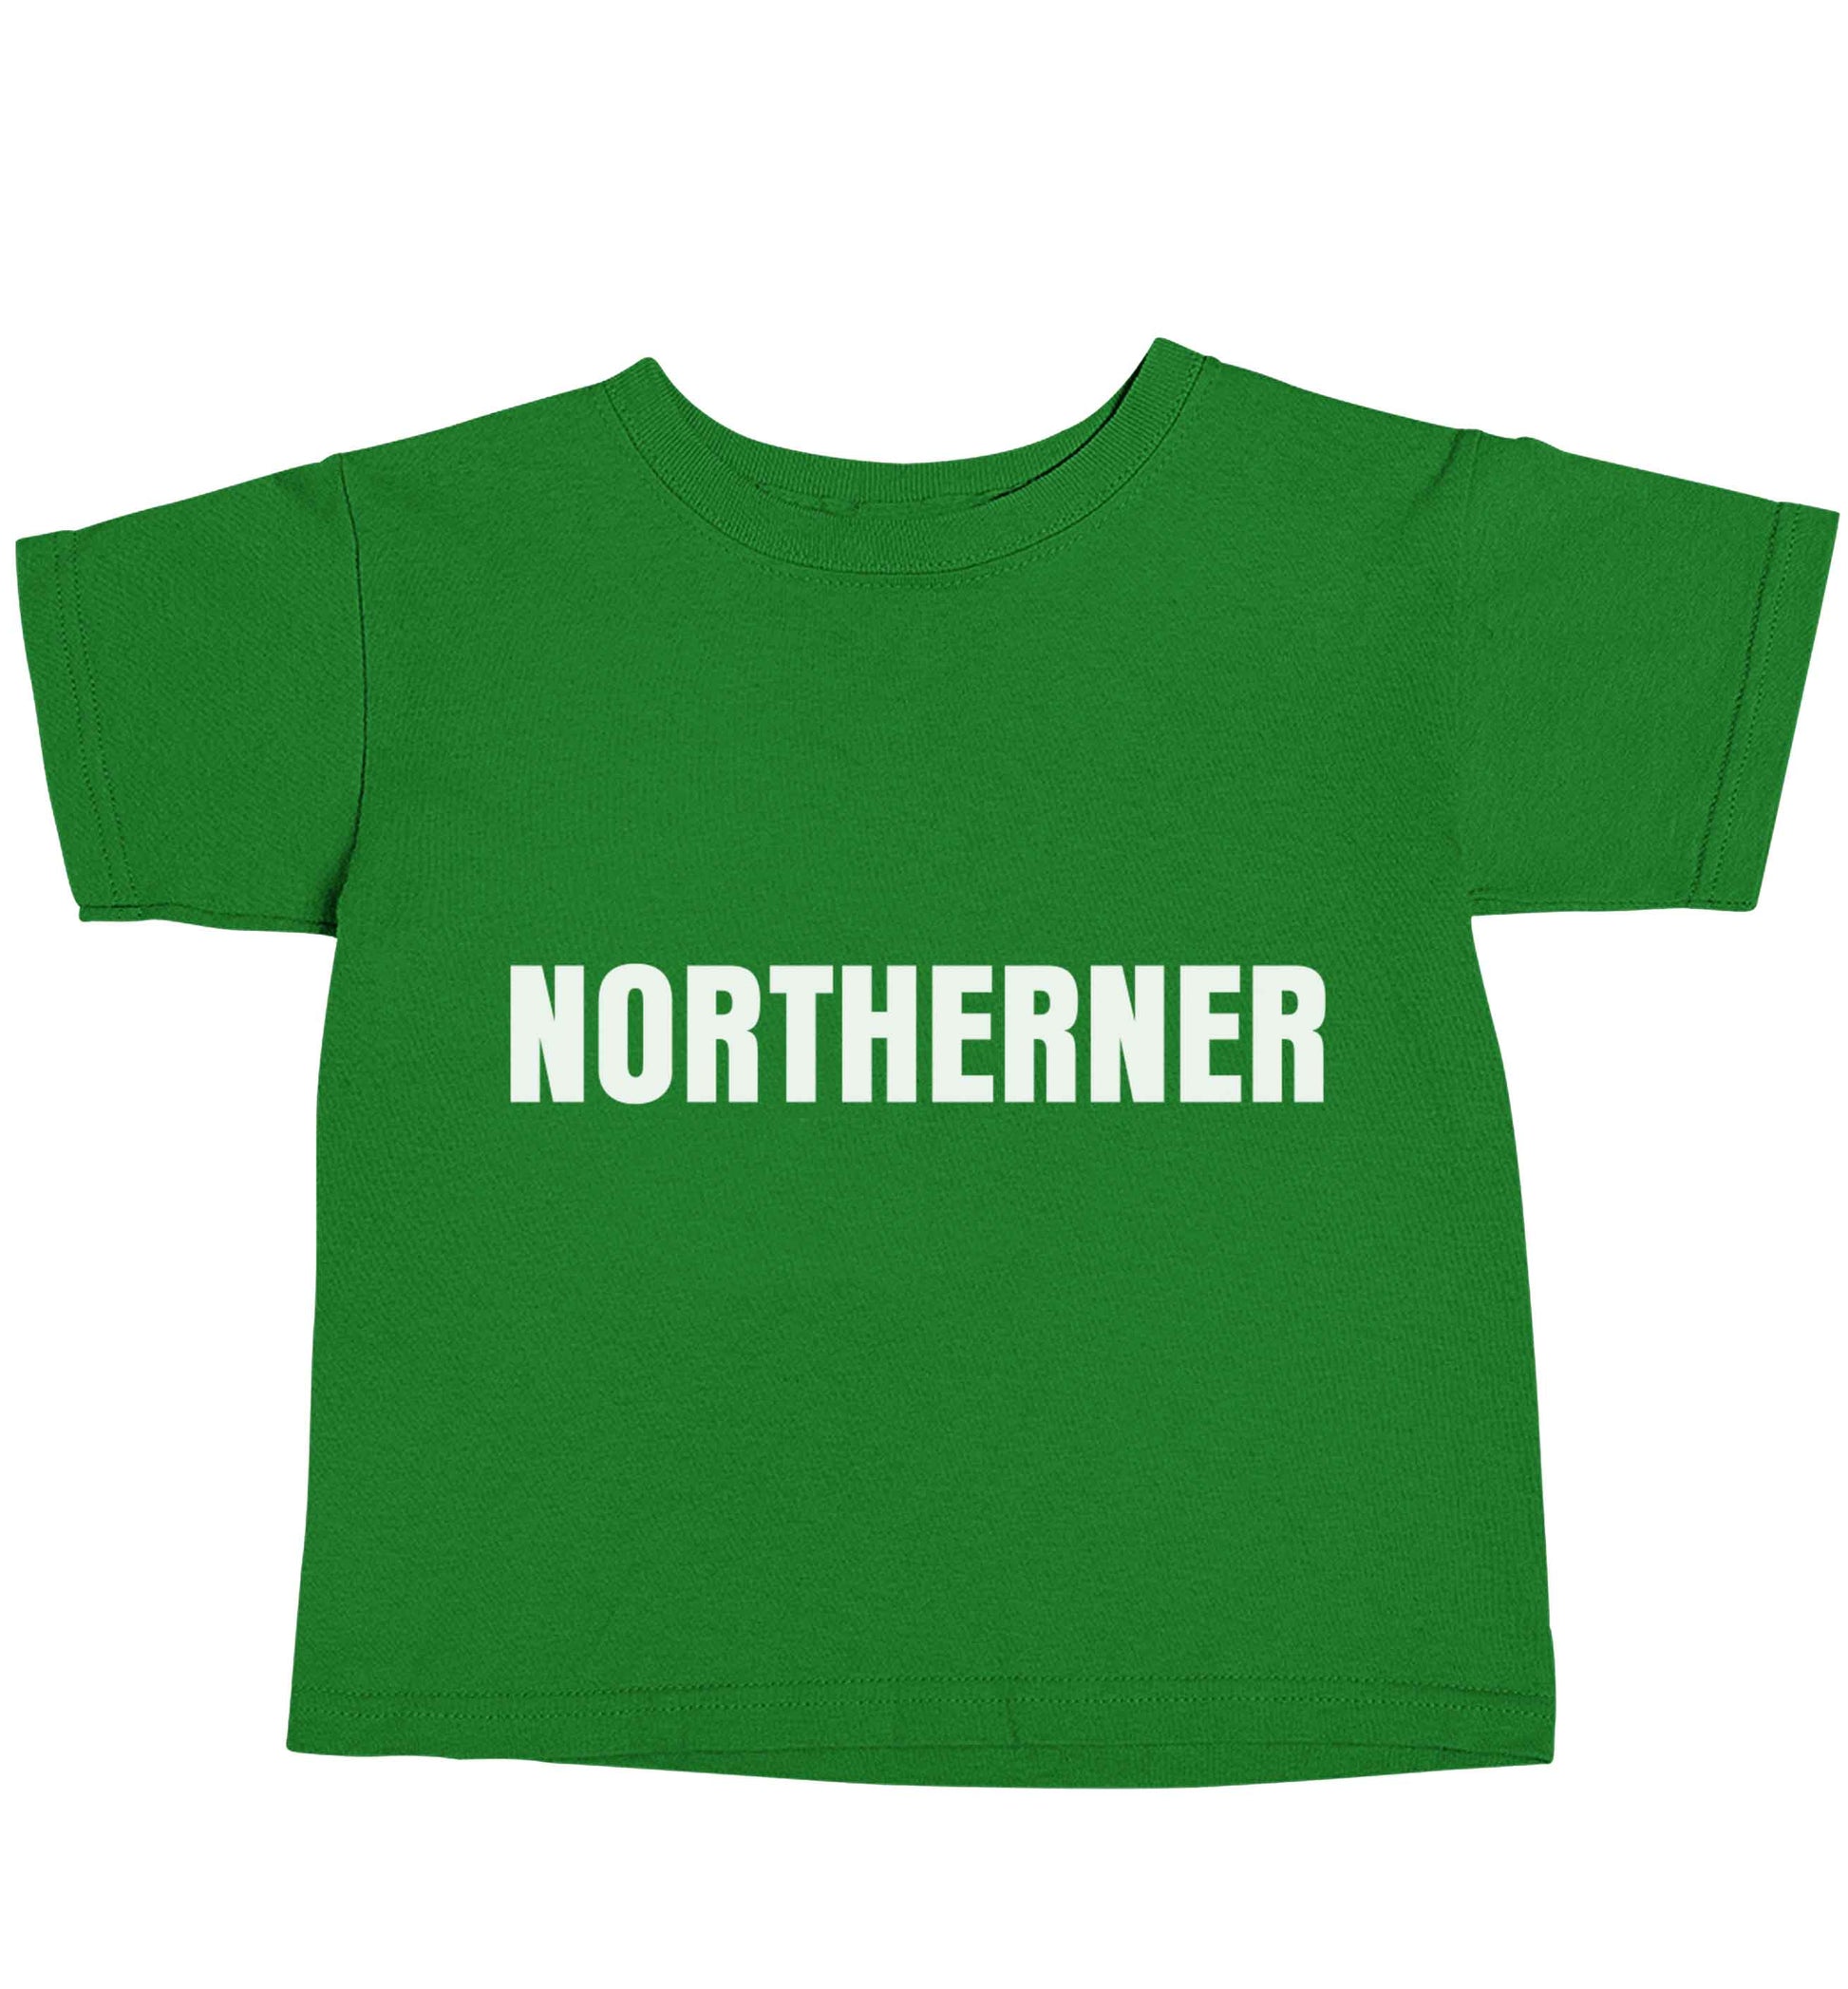 Northerner green baby toddler Tshirt 2 Years